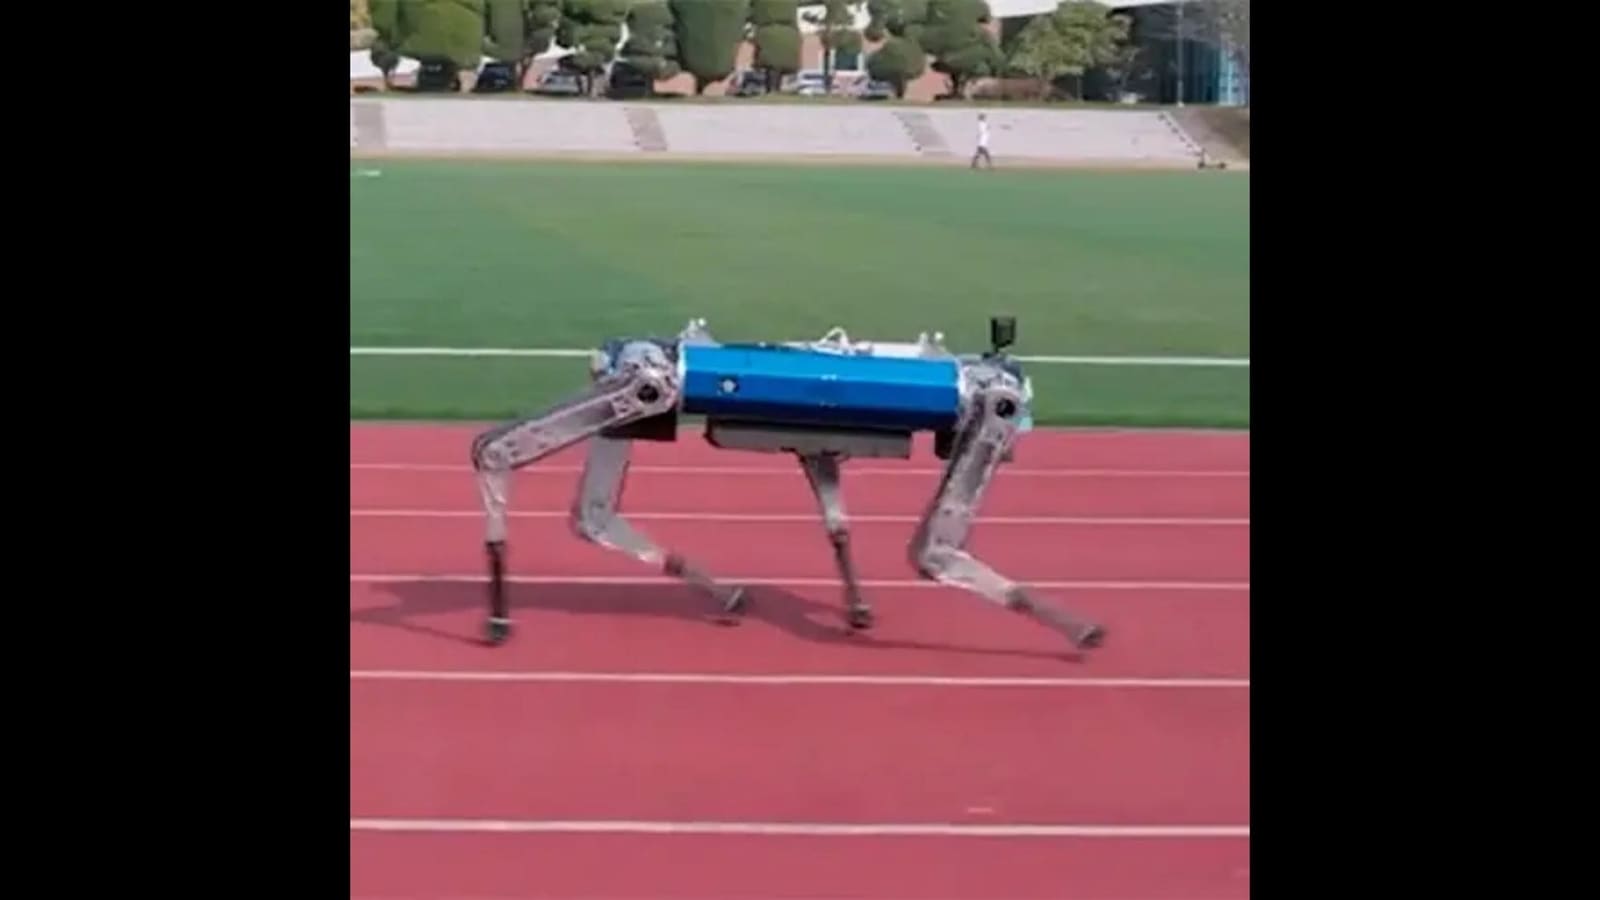 HOUND, the robo-dog, races into history books with 100-m sprint record